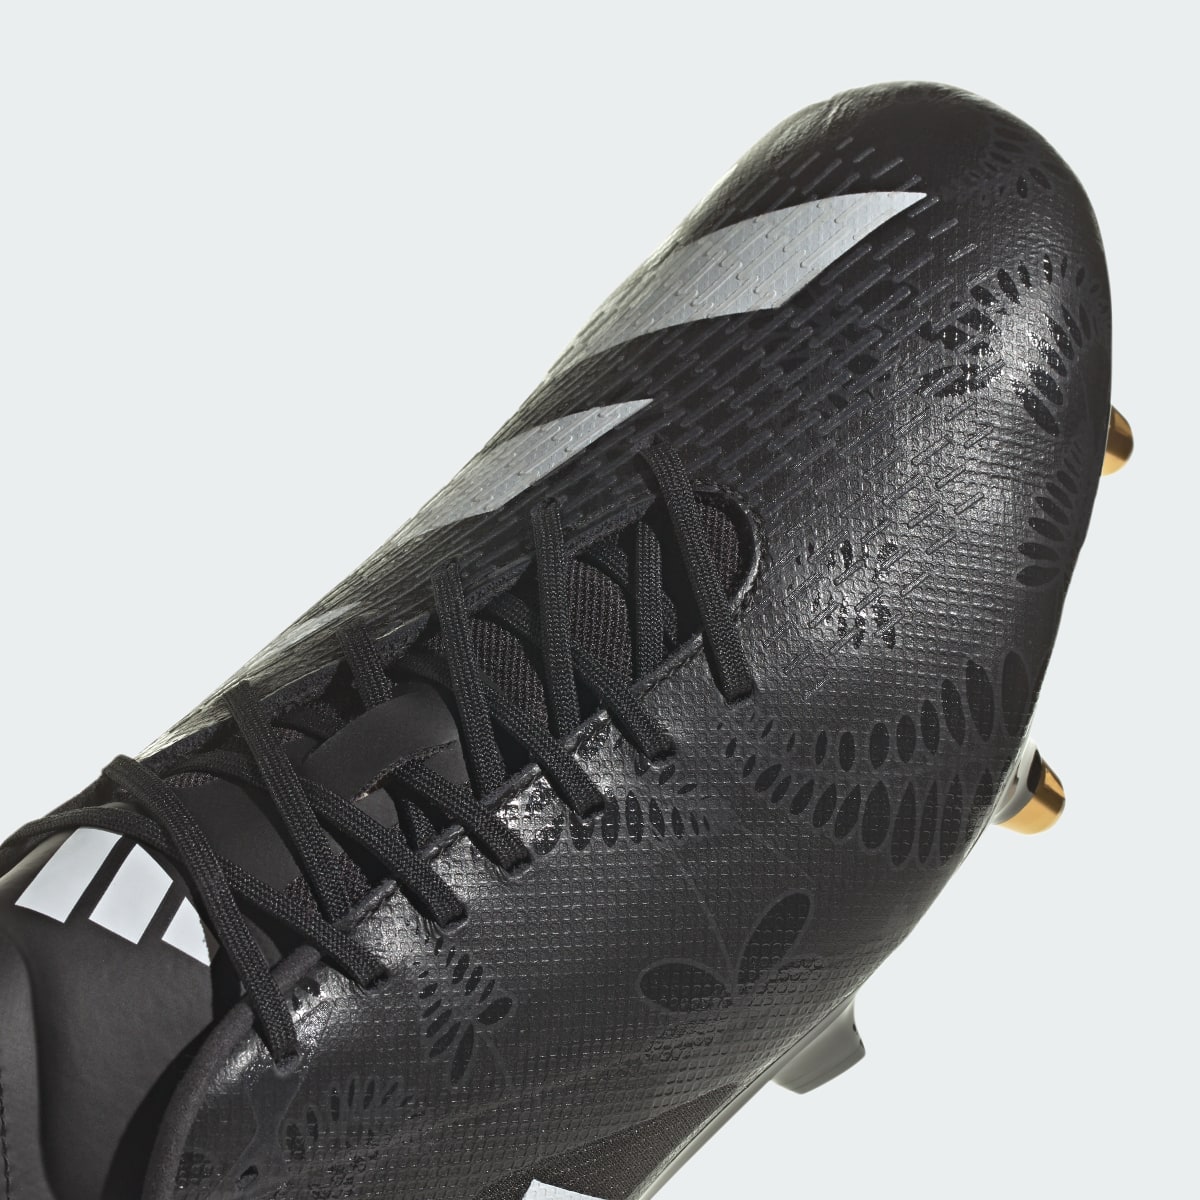 Adidas Adizero RS15 Pro Soft Ground Rugby Boots. 10